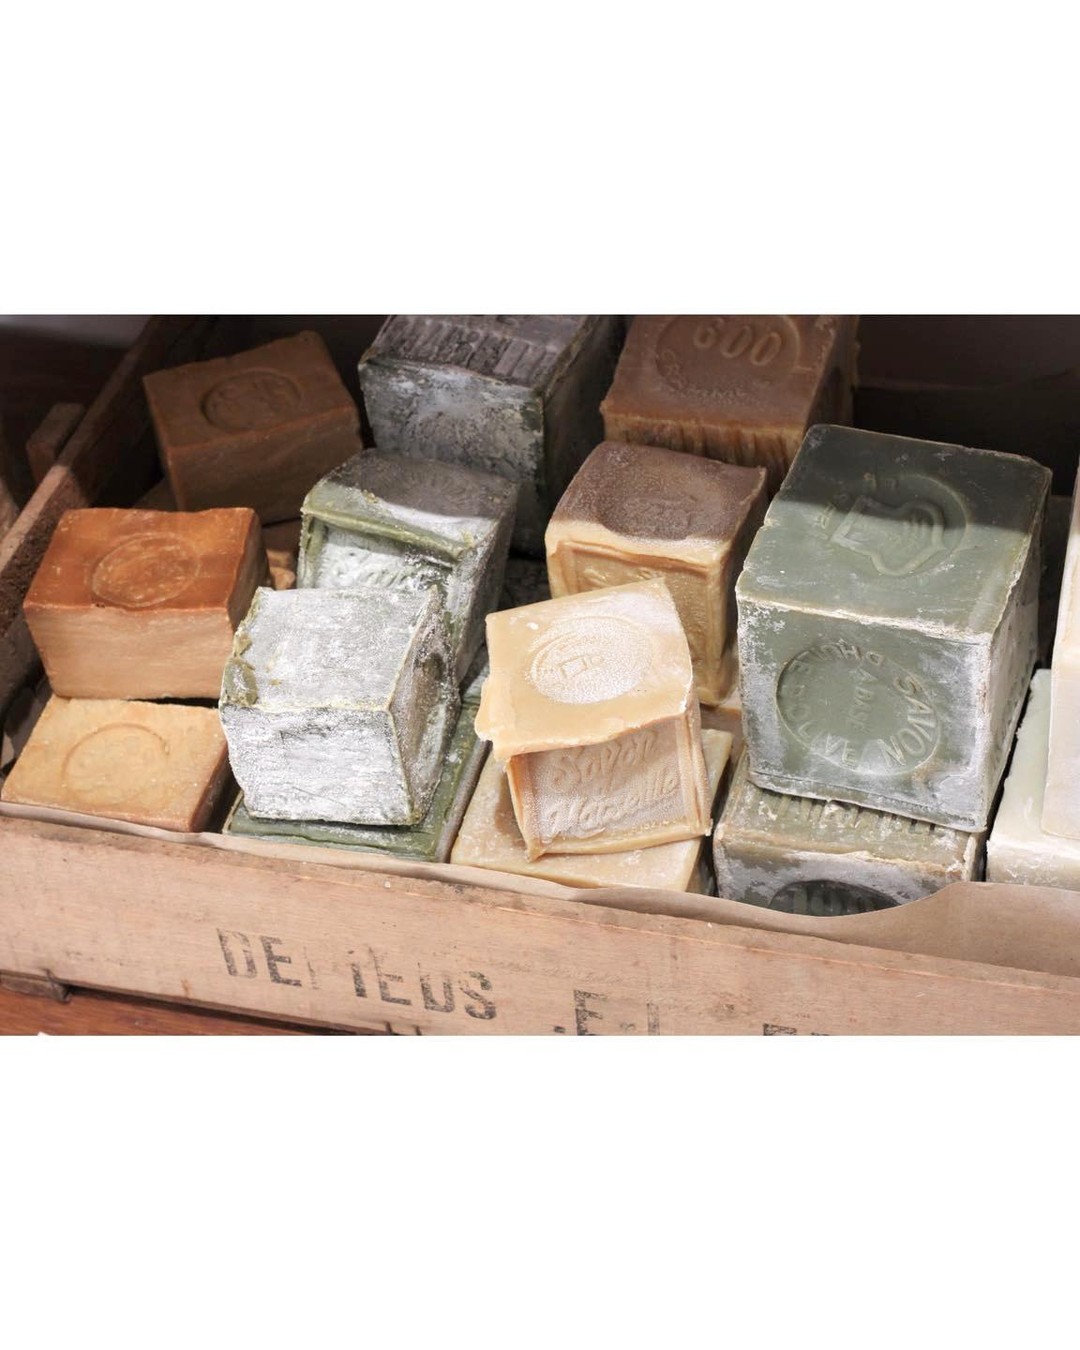 soaps-and-rags-aixenprovence-carlo-app-decoration